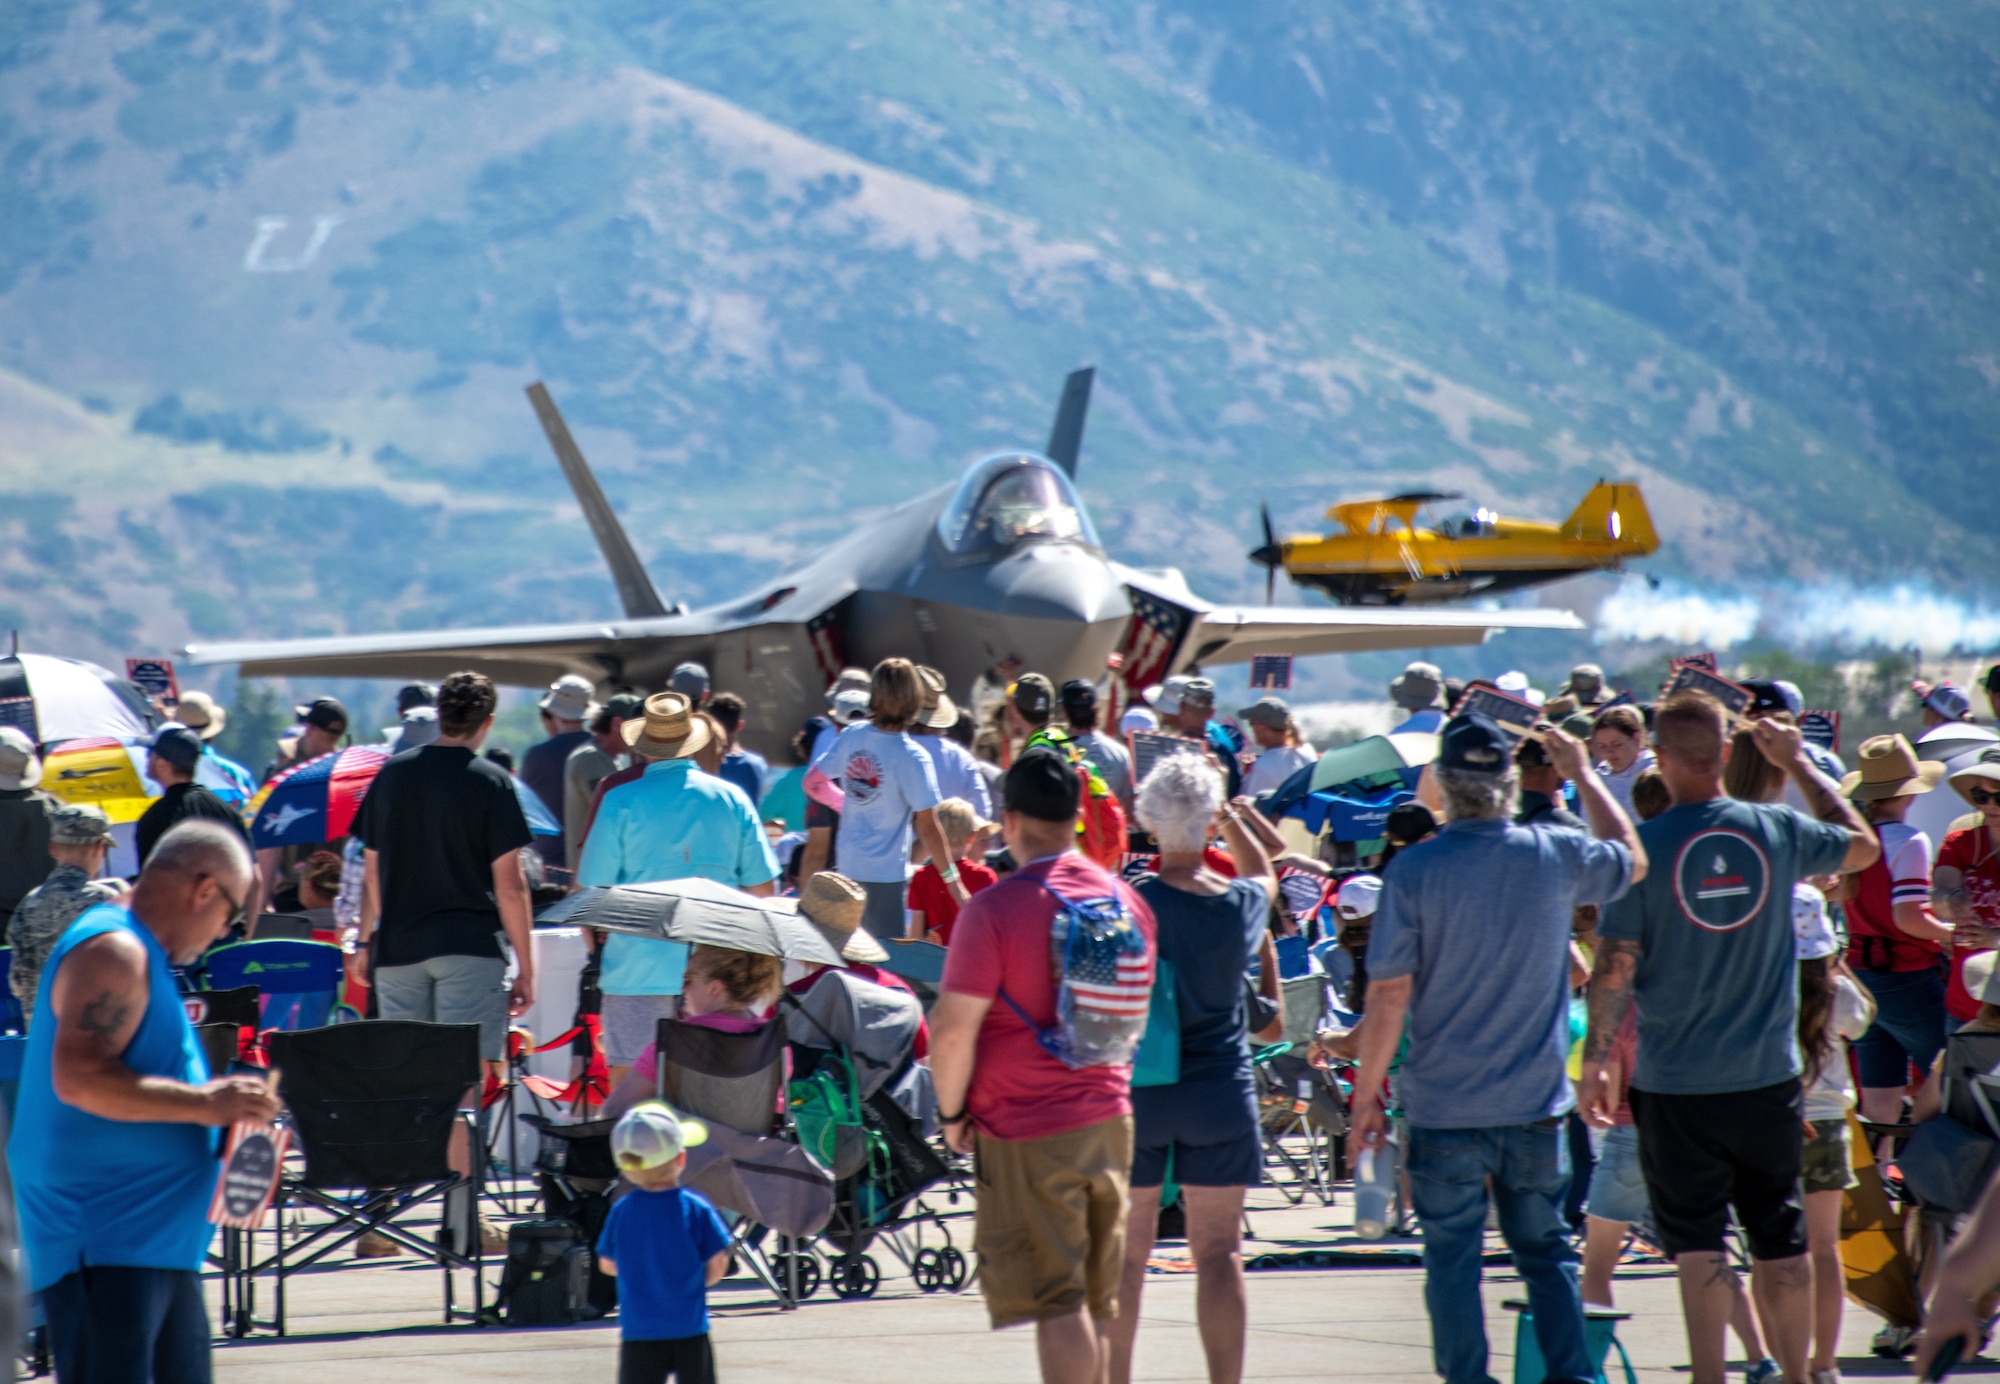 People watching an Air Force jet on the ground and a civilian jet in the air